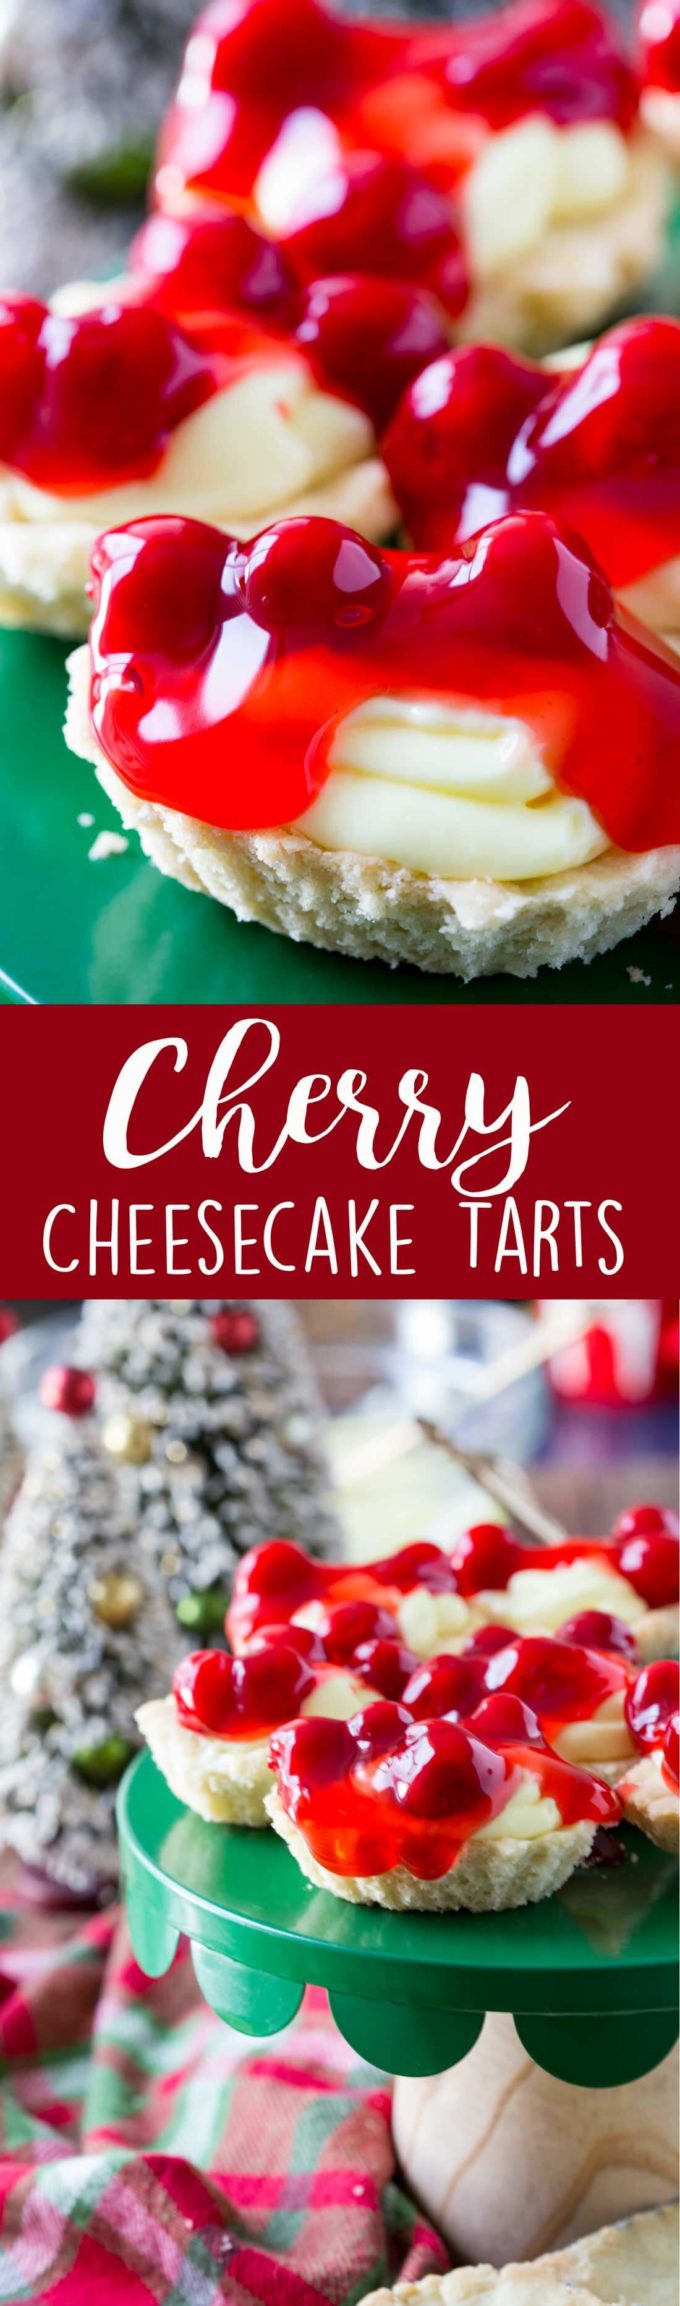 Cherry Cheesecake Butter Tarts are an easy and impressive dessert